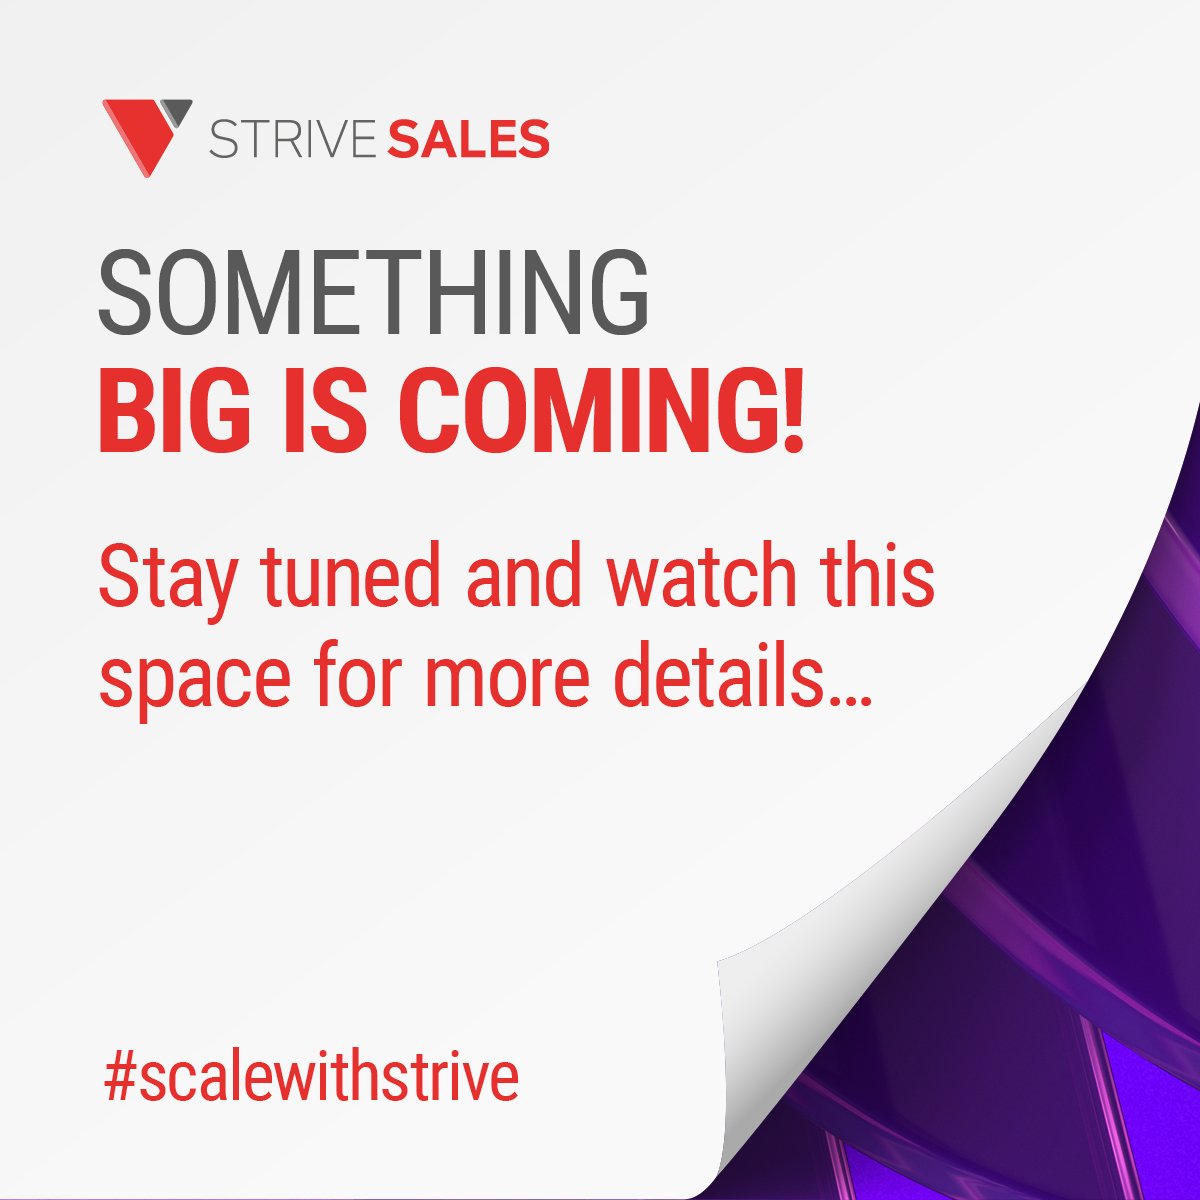 We have some 𝐁𝐈𝐆 news coming 👀

Follow our page for more information - coming soon!

#scalewithstrive #saassales #companyannouncement